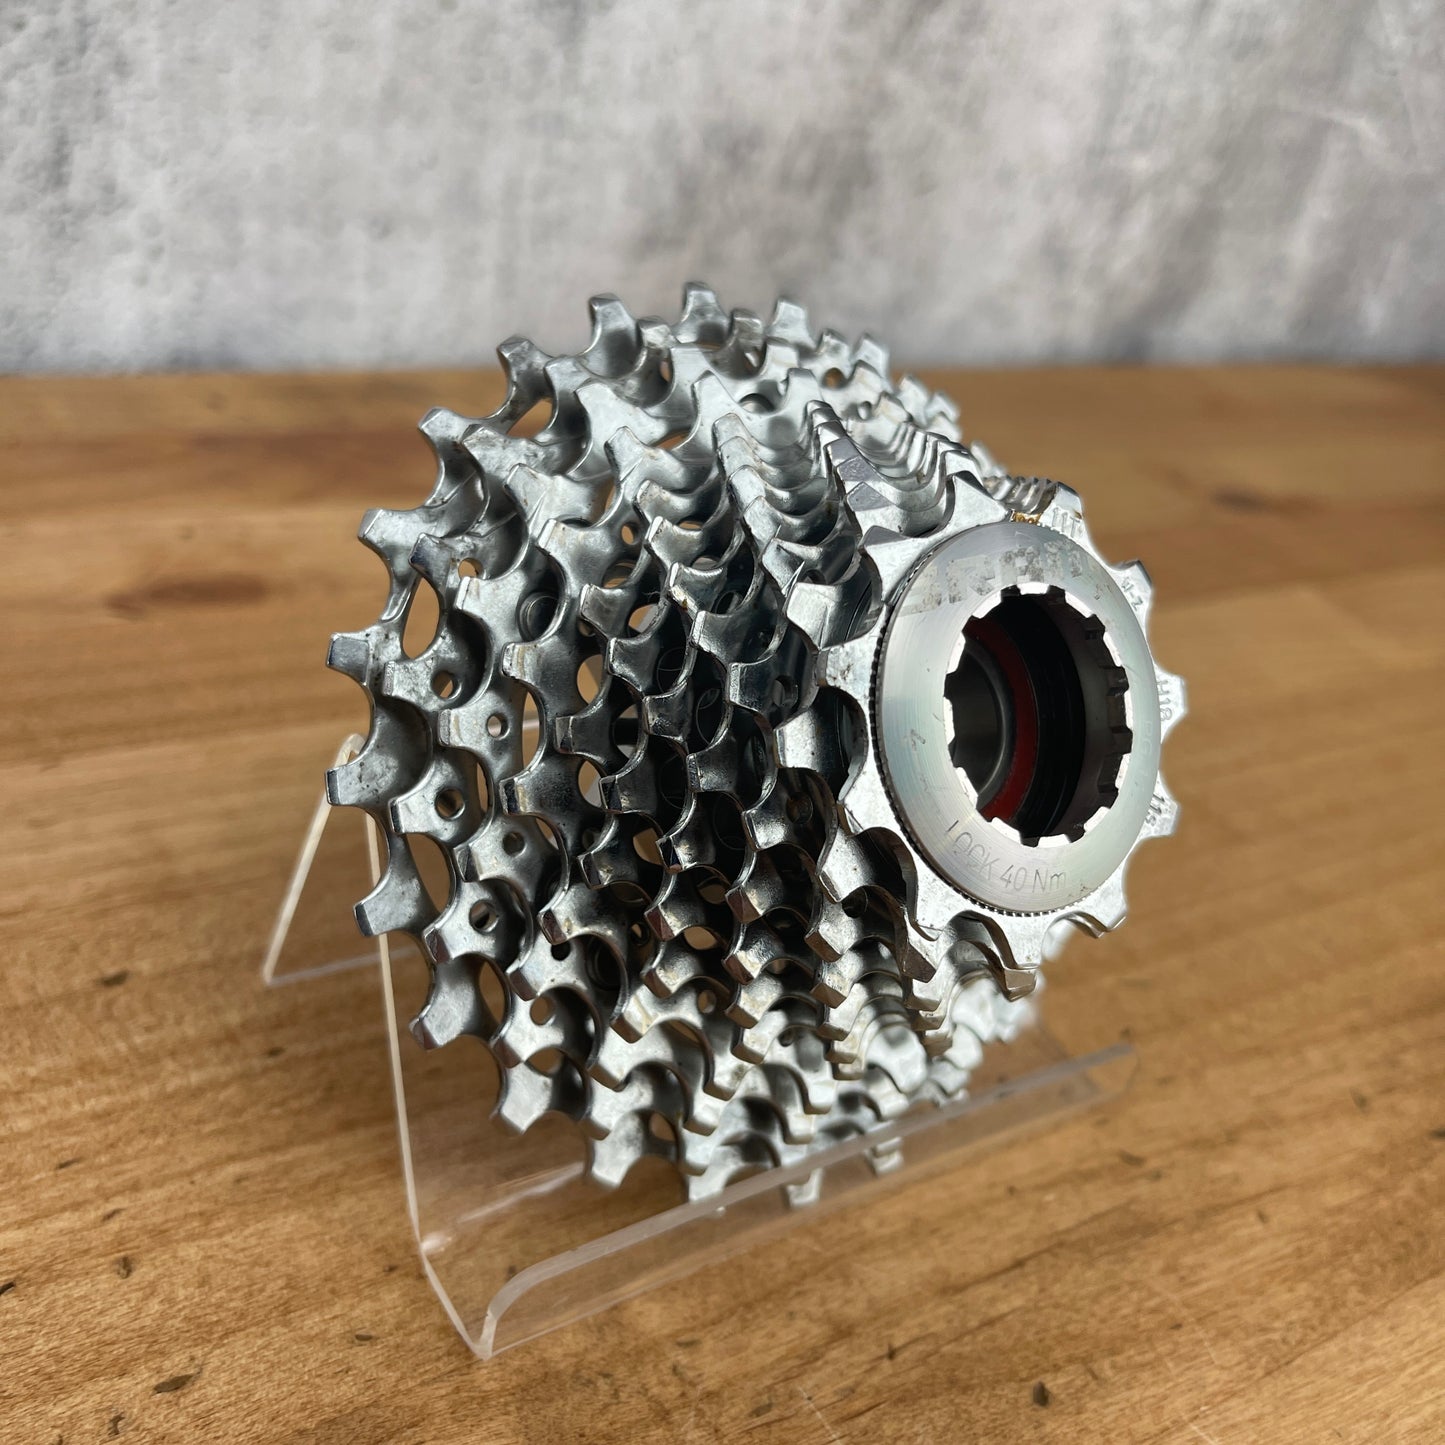 SRAM PG1170 11-Speed 11-25t Bicycle Cassette "Typical Wear" 243g